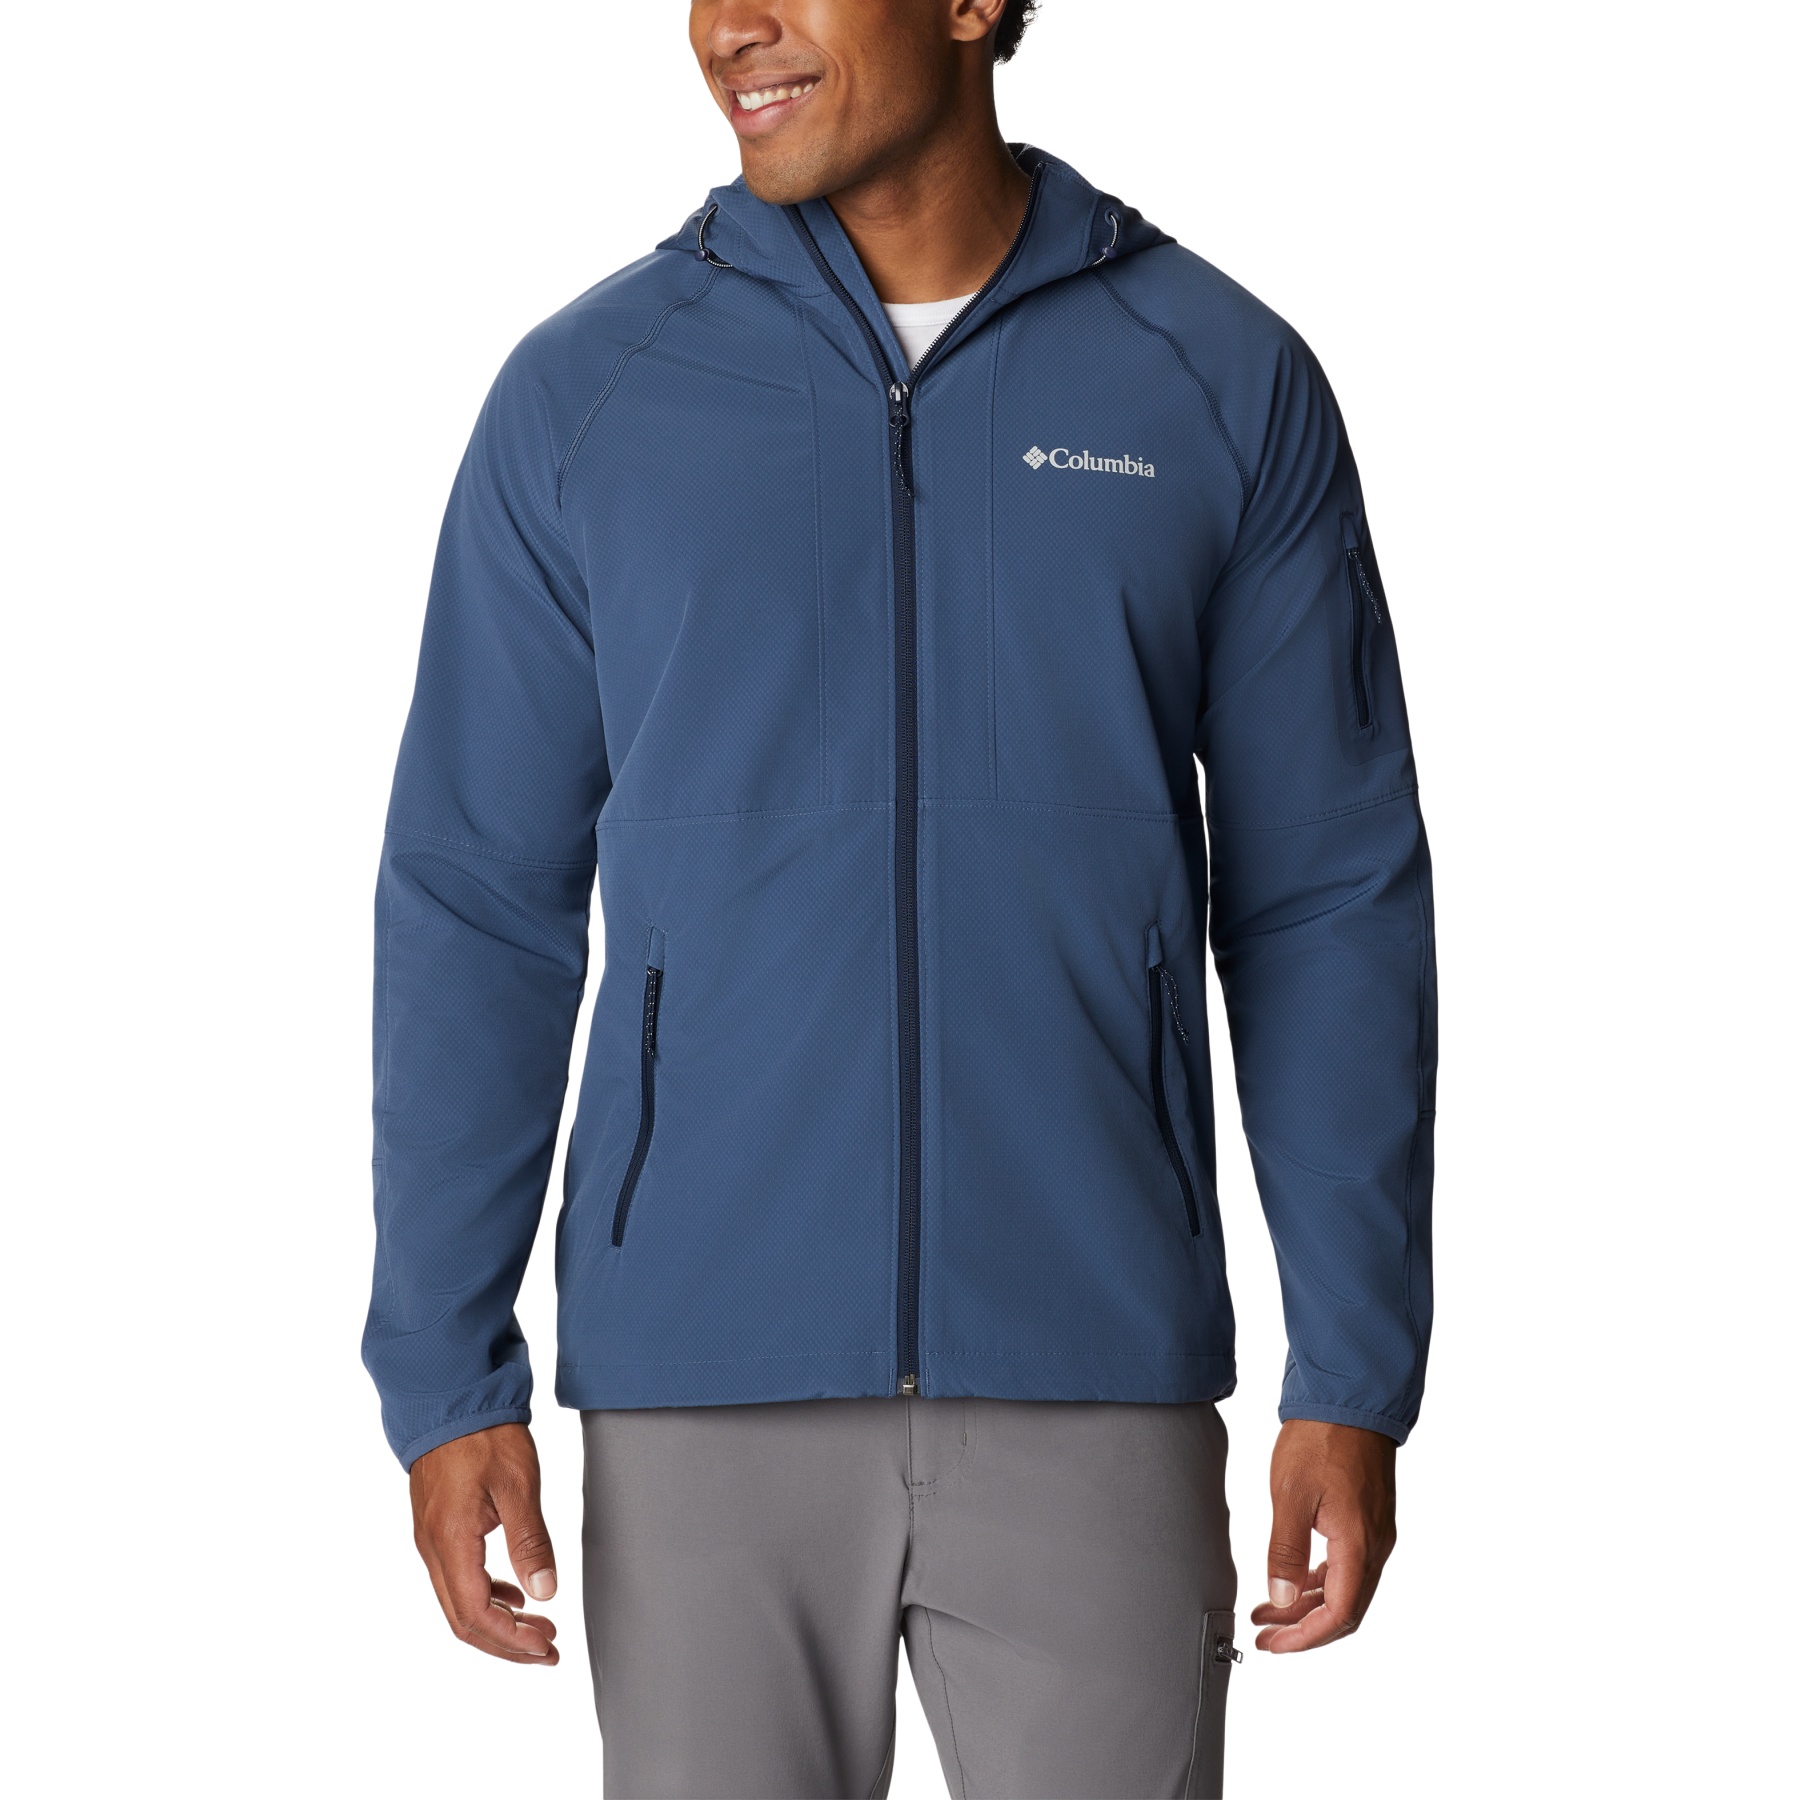 Columbia Omni Shield Jacket With Hood | escapeauthority.com